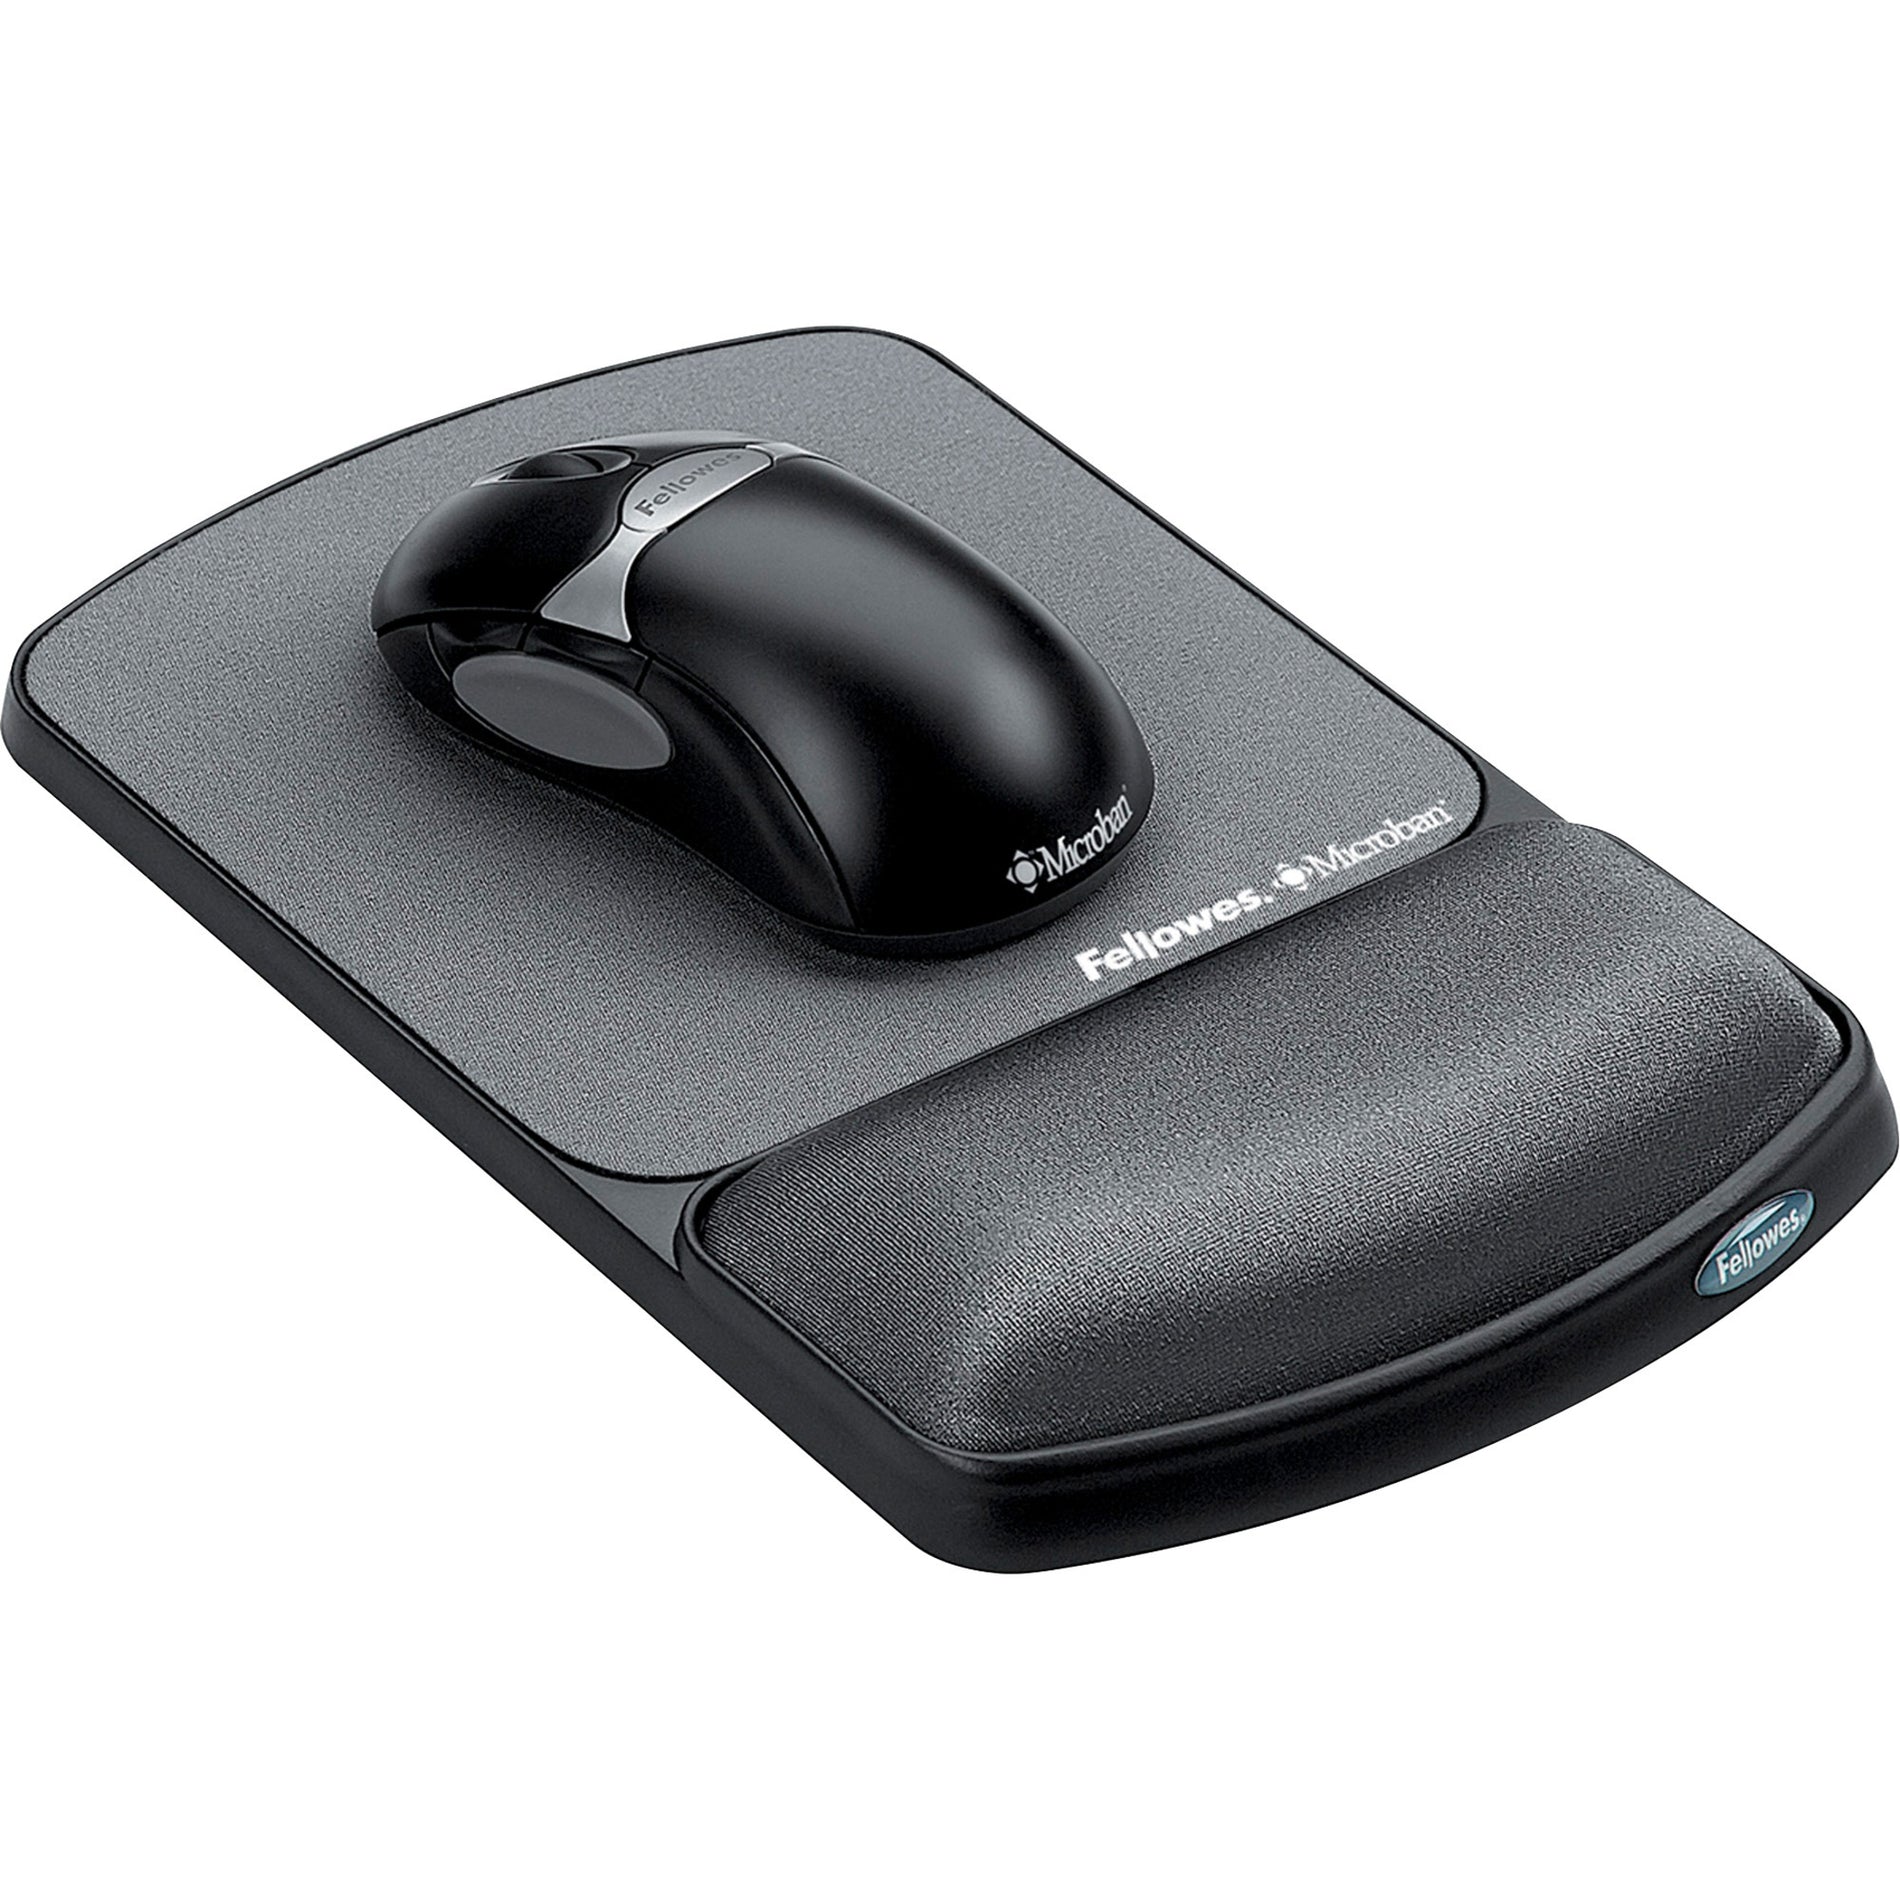 Fellowes 9175101 Mouse Pad / Wrist Support with Microban Protection, Soft, Comfortable, Non-skid, Durable, Antimicrobial, Pressure Reliever, Ergonomic, Fatigue-free